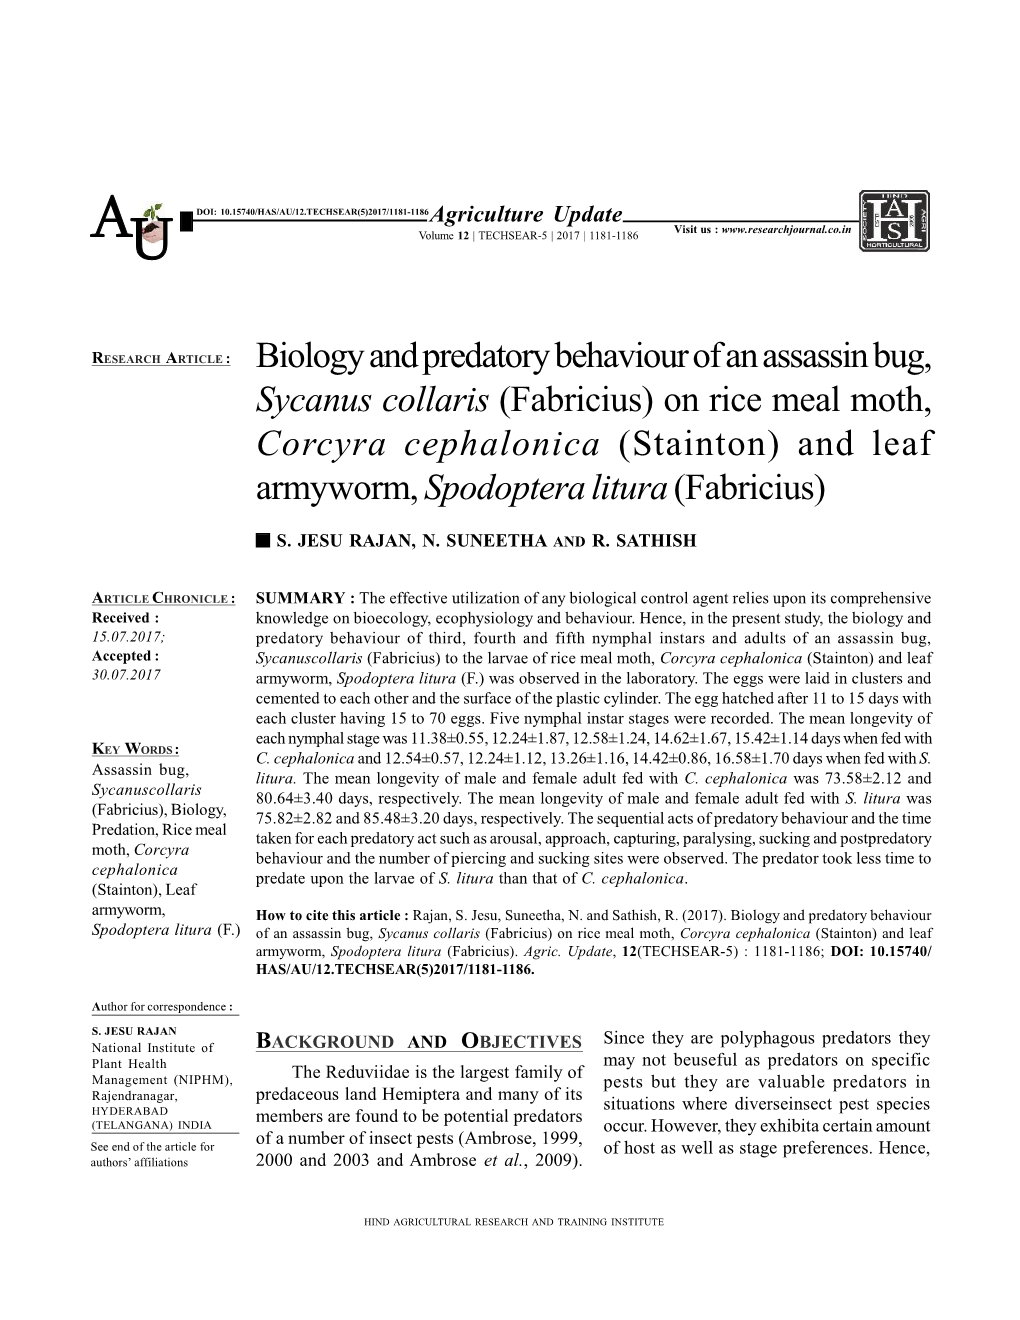 Biology and Predatory Behaviour of an Assassin Bug, Sycanus Collaris (Fabricius) on Rice Meal Moth, Corcyra Cephalonica (Stainto